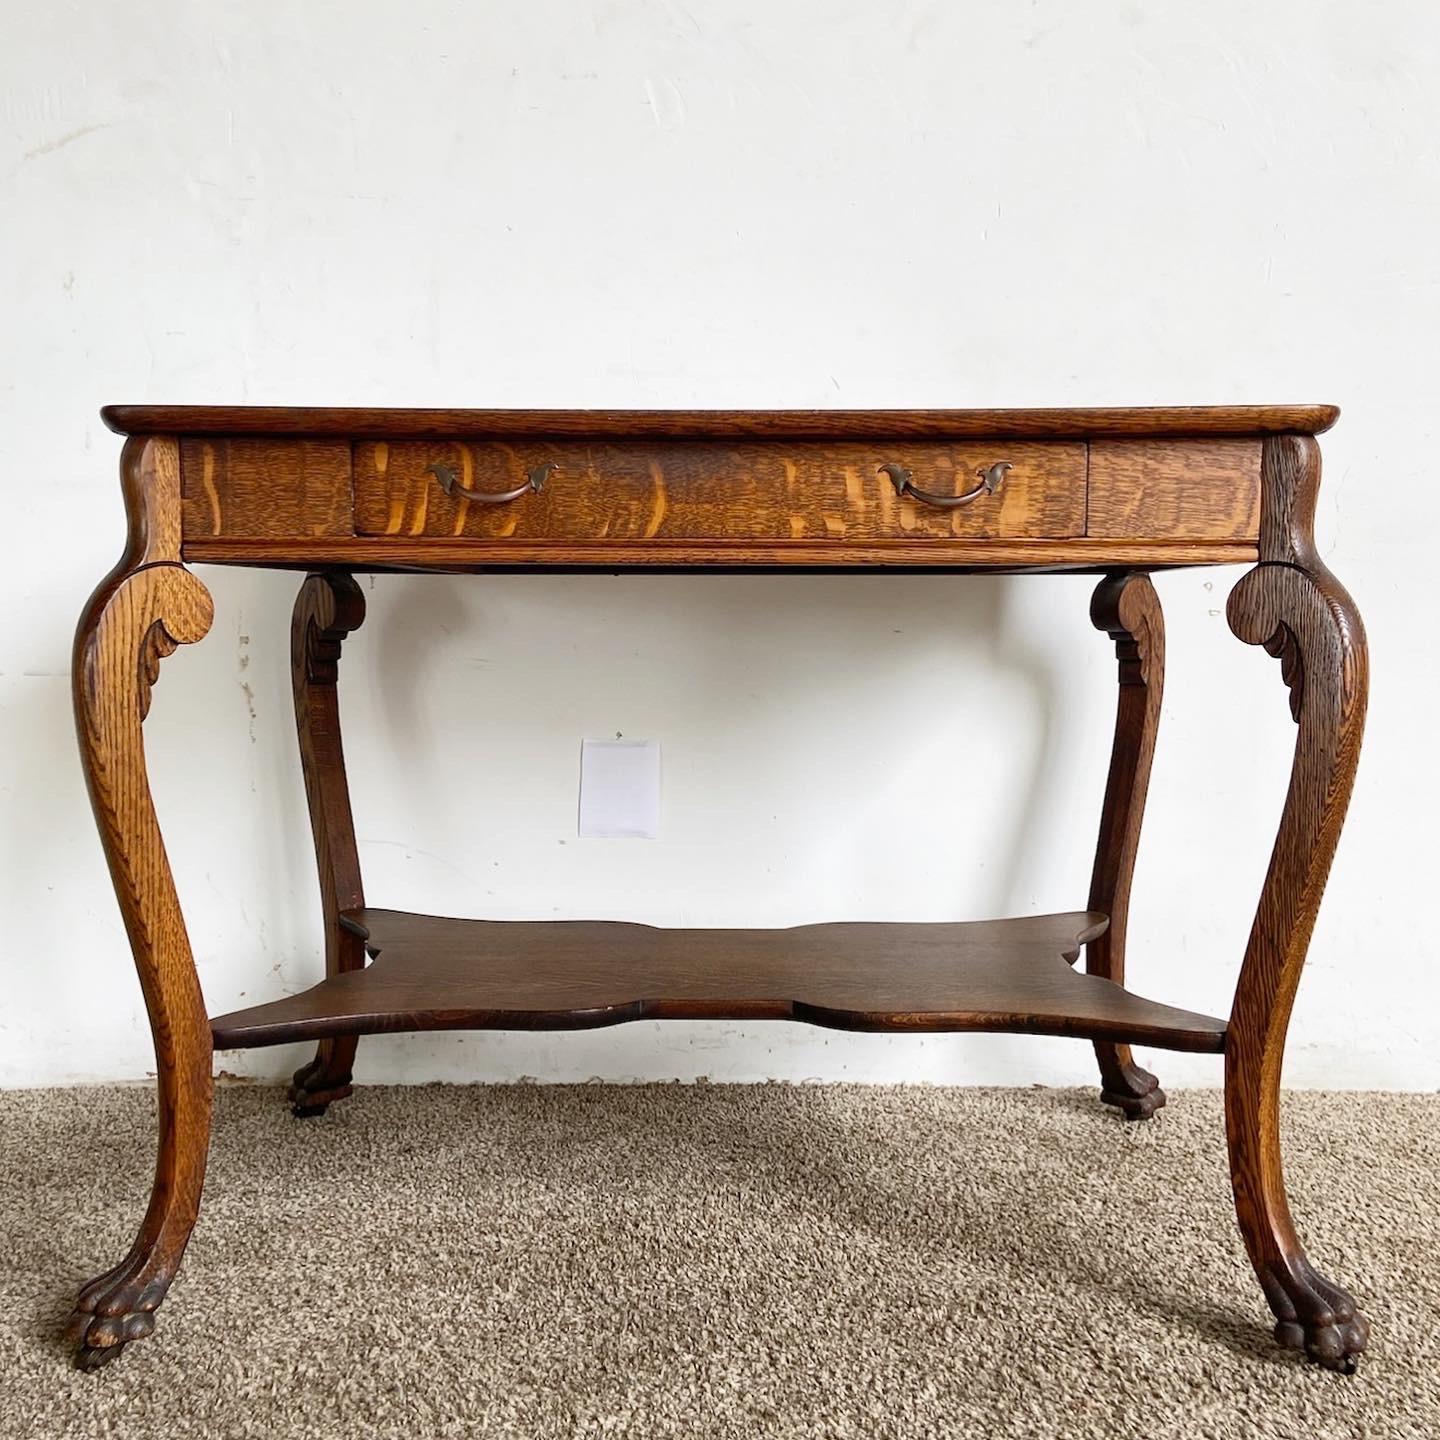 Introducing our Vintage Tiger Oak Console Table/Desk, a fusion of function, elegance, and vintage charm, featuring a unique grain and a central drawer.

Crafted from striking Tiger Oak, showcasing a warm, rich grain and distinctive stripes.
Features